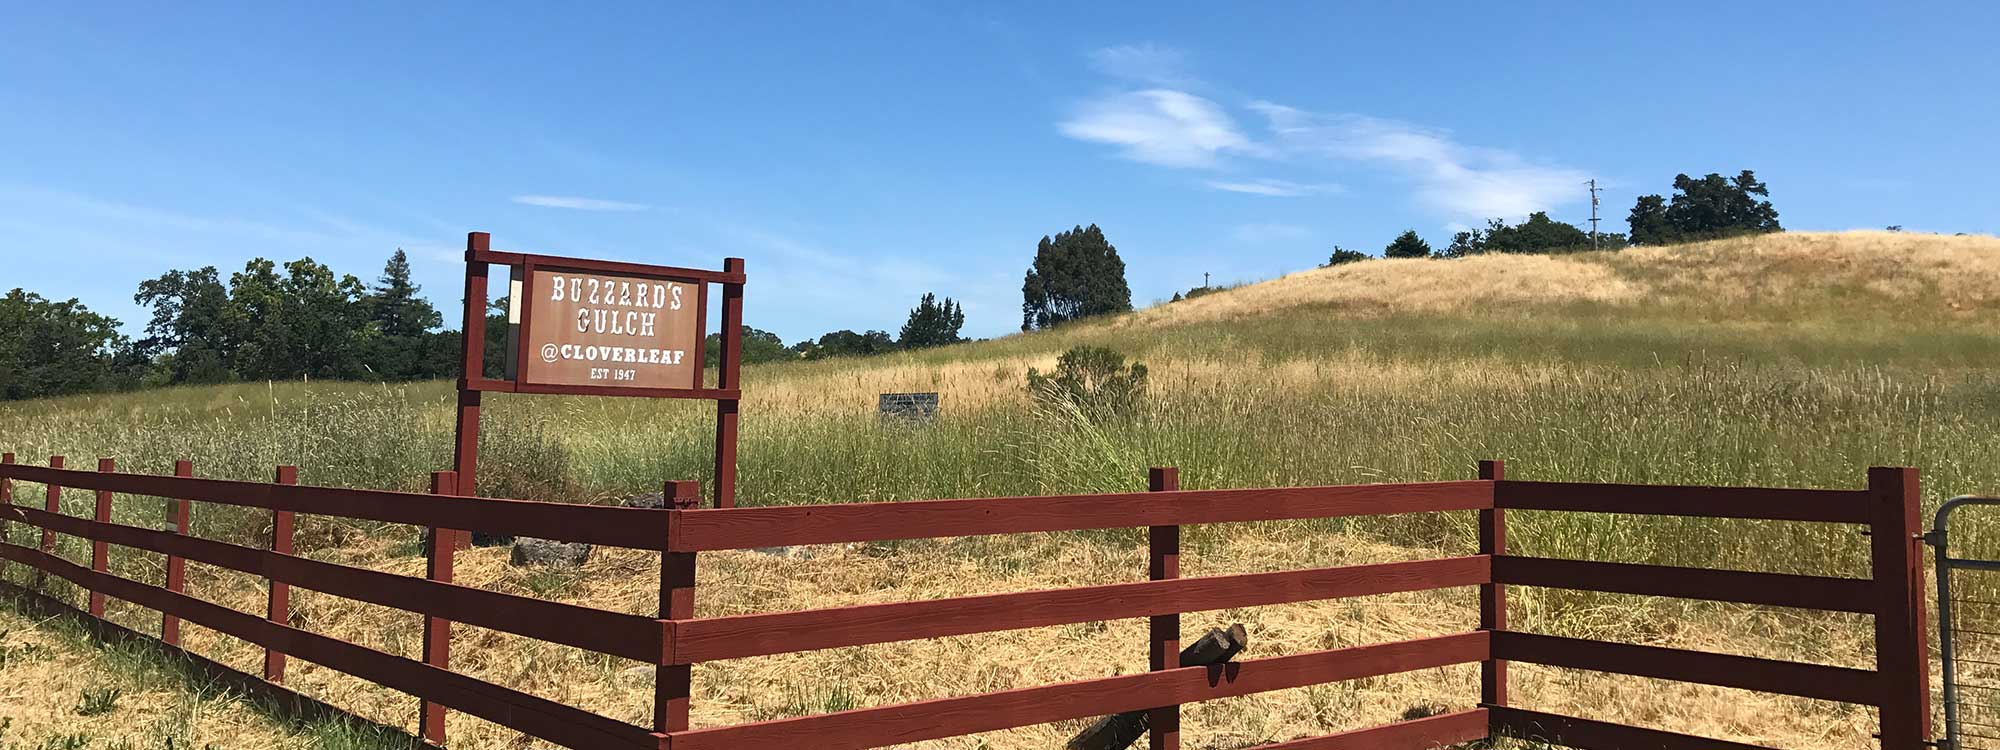 Sonoma Solstice threatens greenbelt lands at the site of the old Buzzard's Gulch.